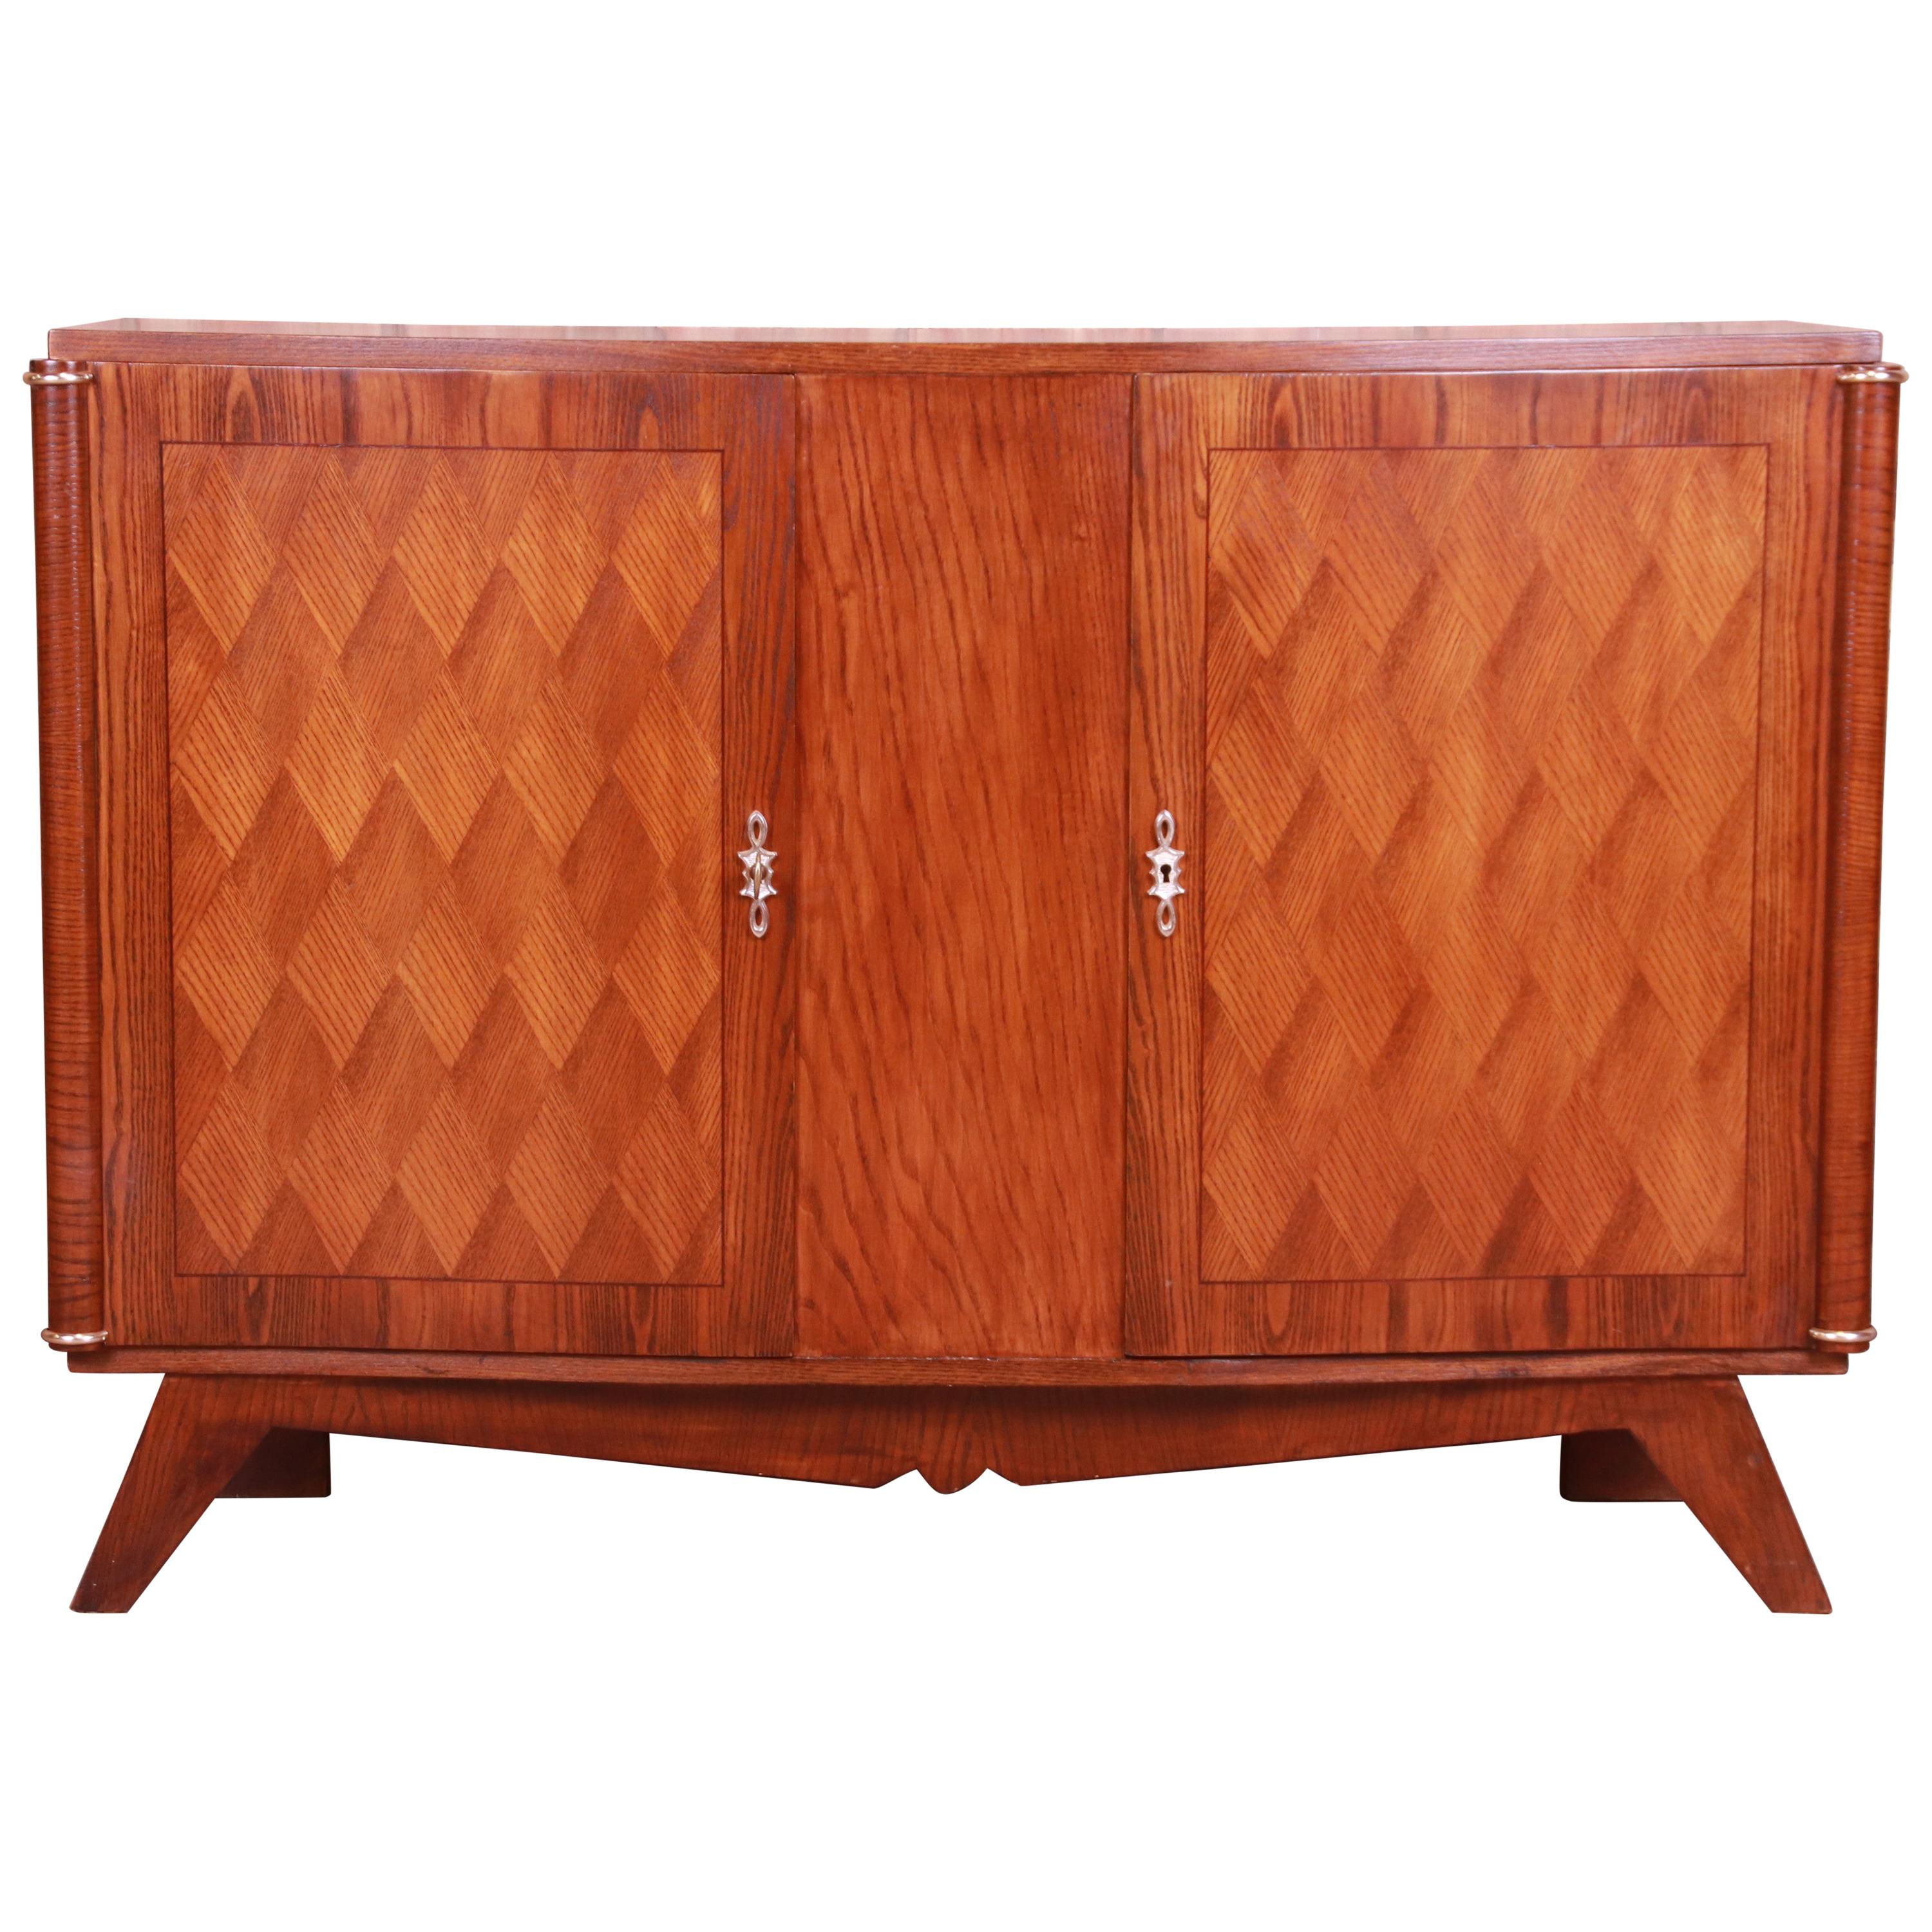 Jules Leleu Style French Art Deco Oak Parquetry Sideboard or Bar Cabinet